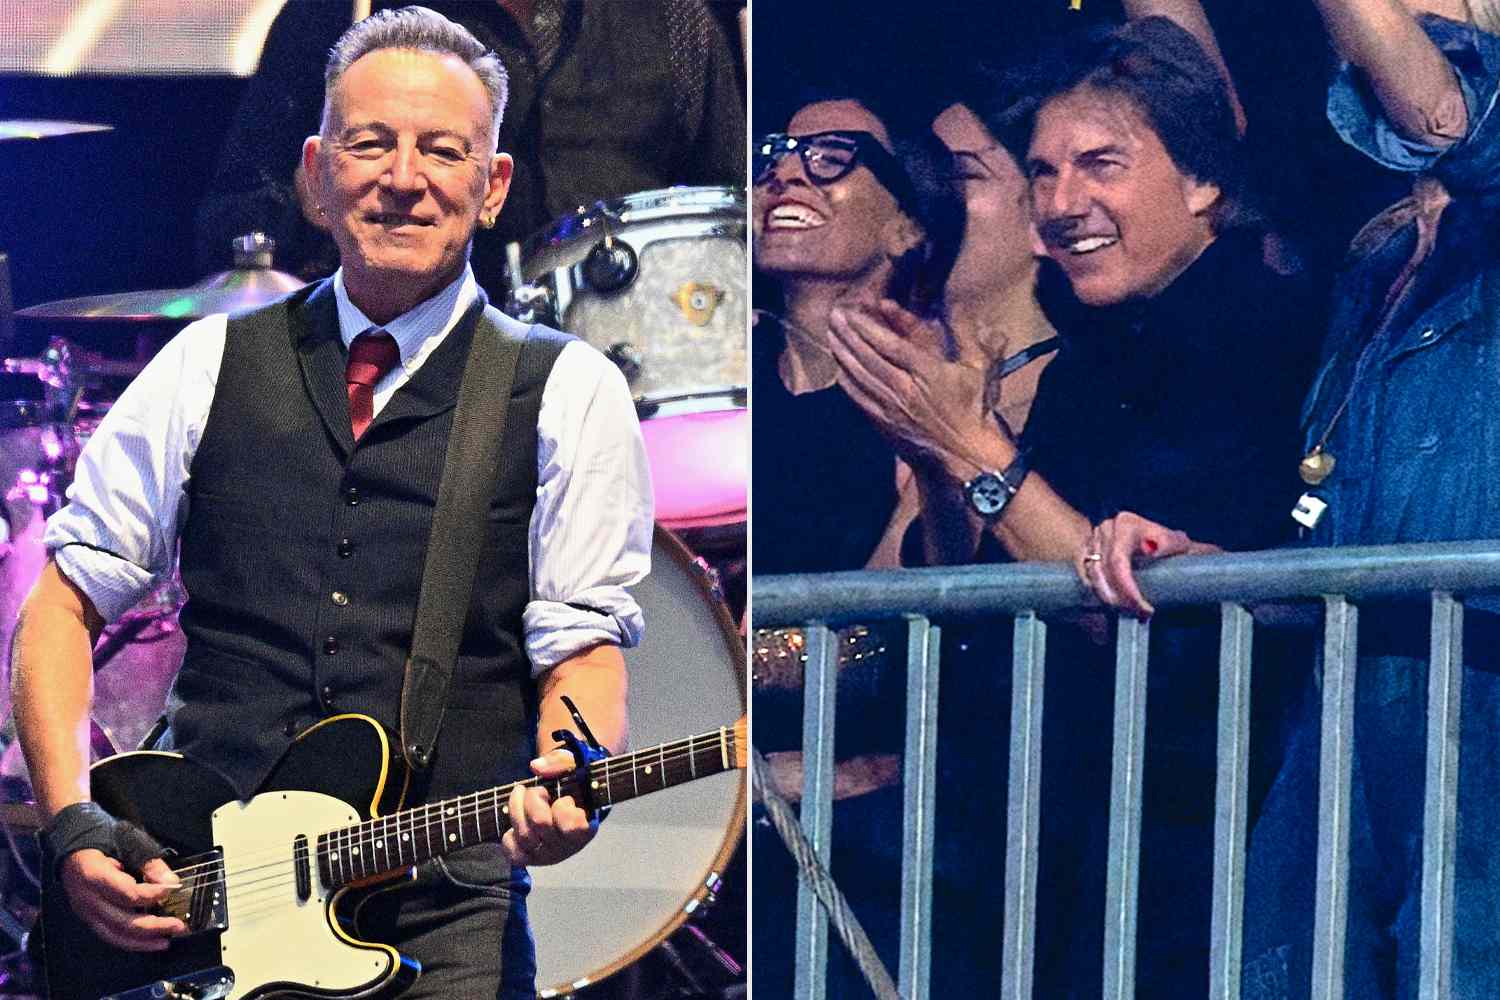 Tom Cruise Rocks Out to Bruce Springsteen at Wembley Stadium in London — See the Photos!